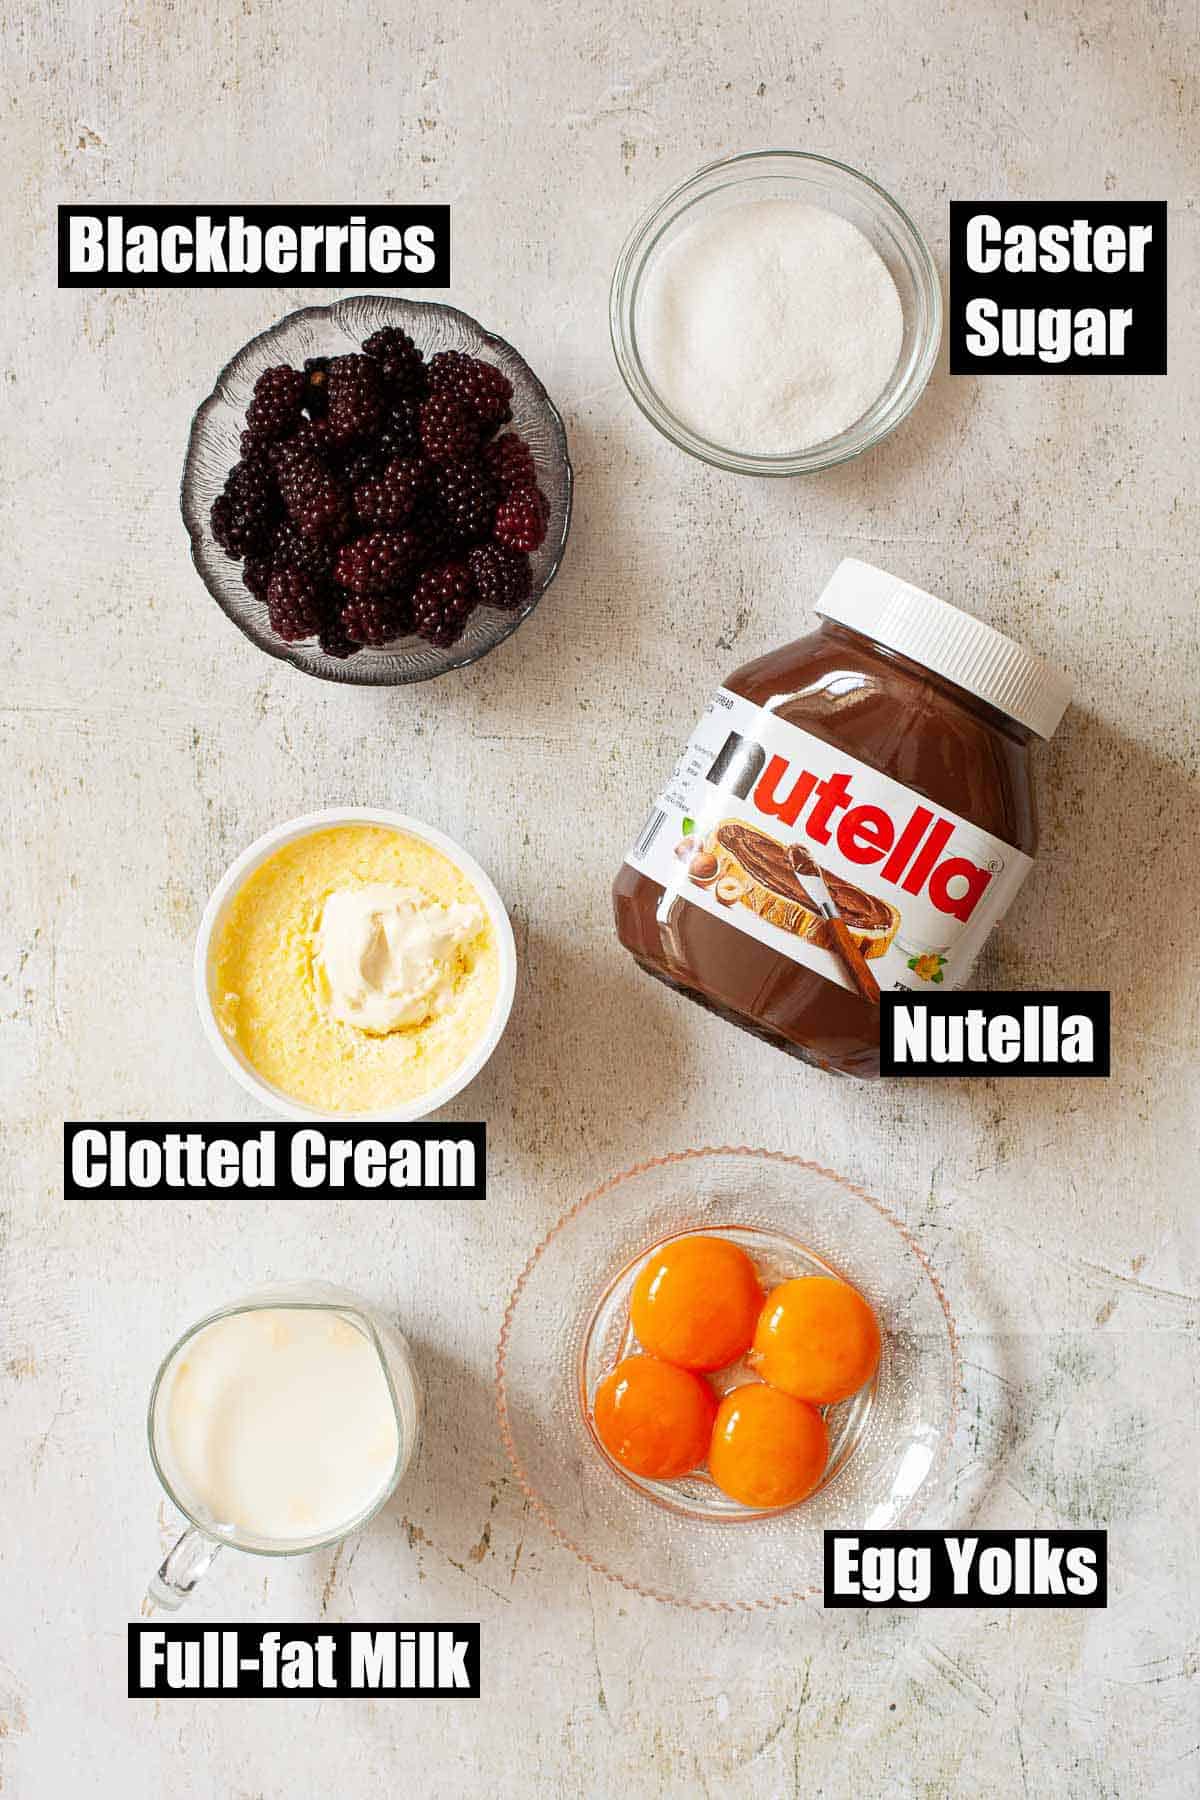 Ingredients for a frozen dessert with chocolate spread and fruit with text overlay.